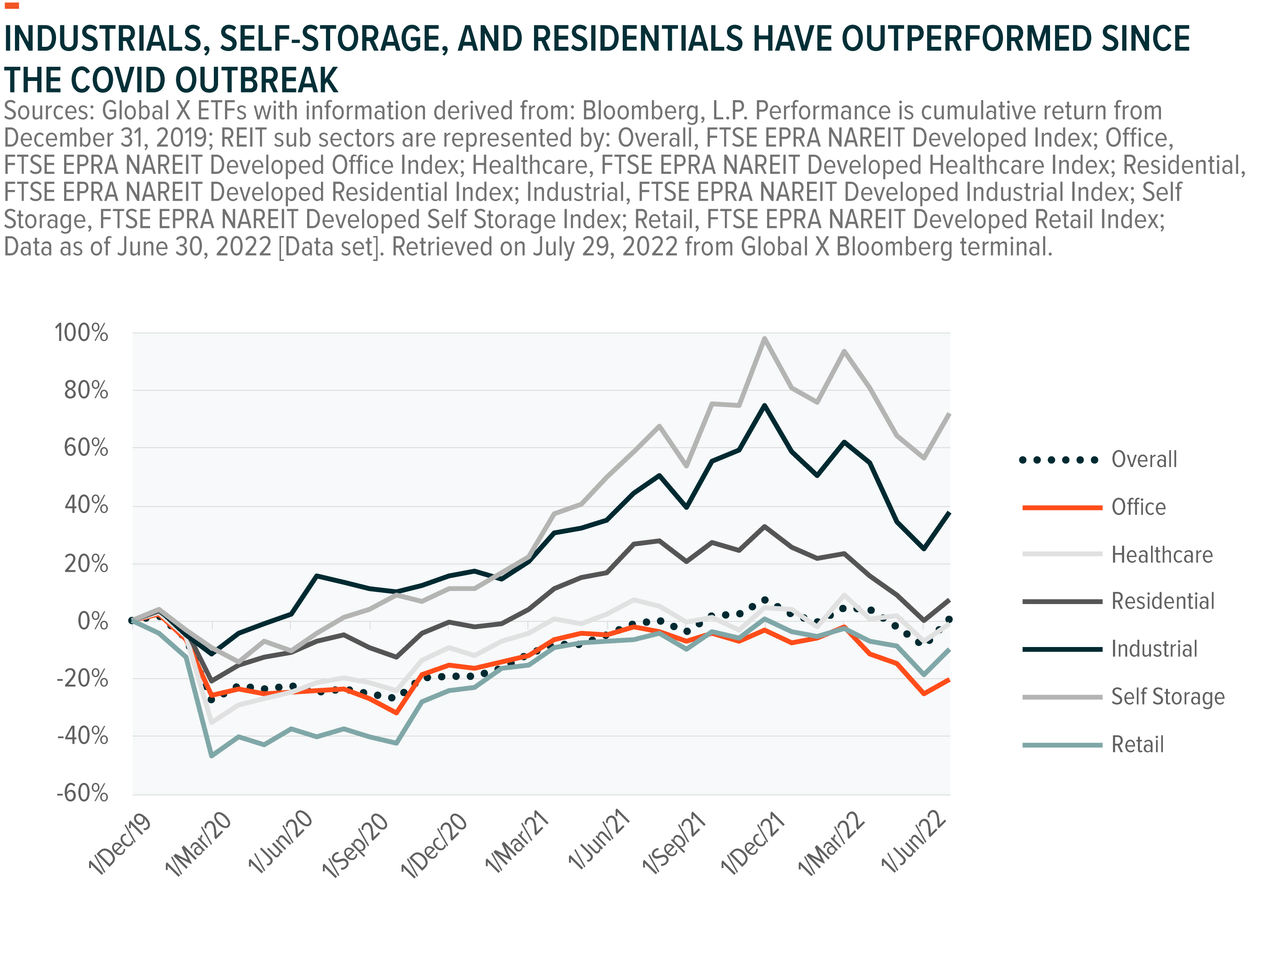 Industrials, self-storage, and residentials